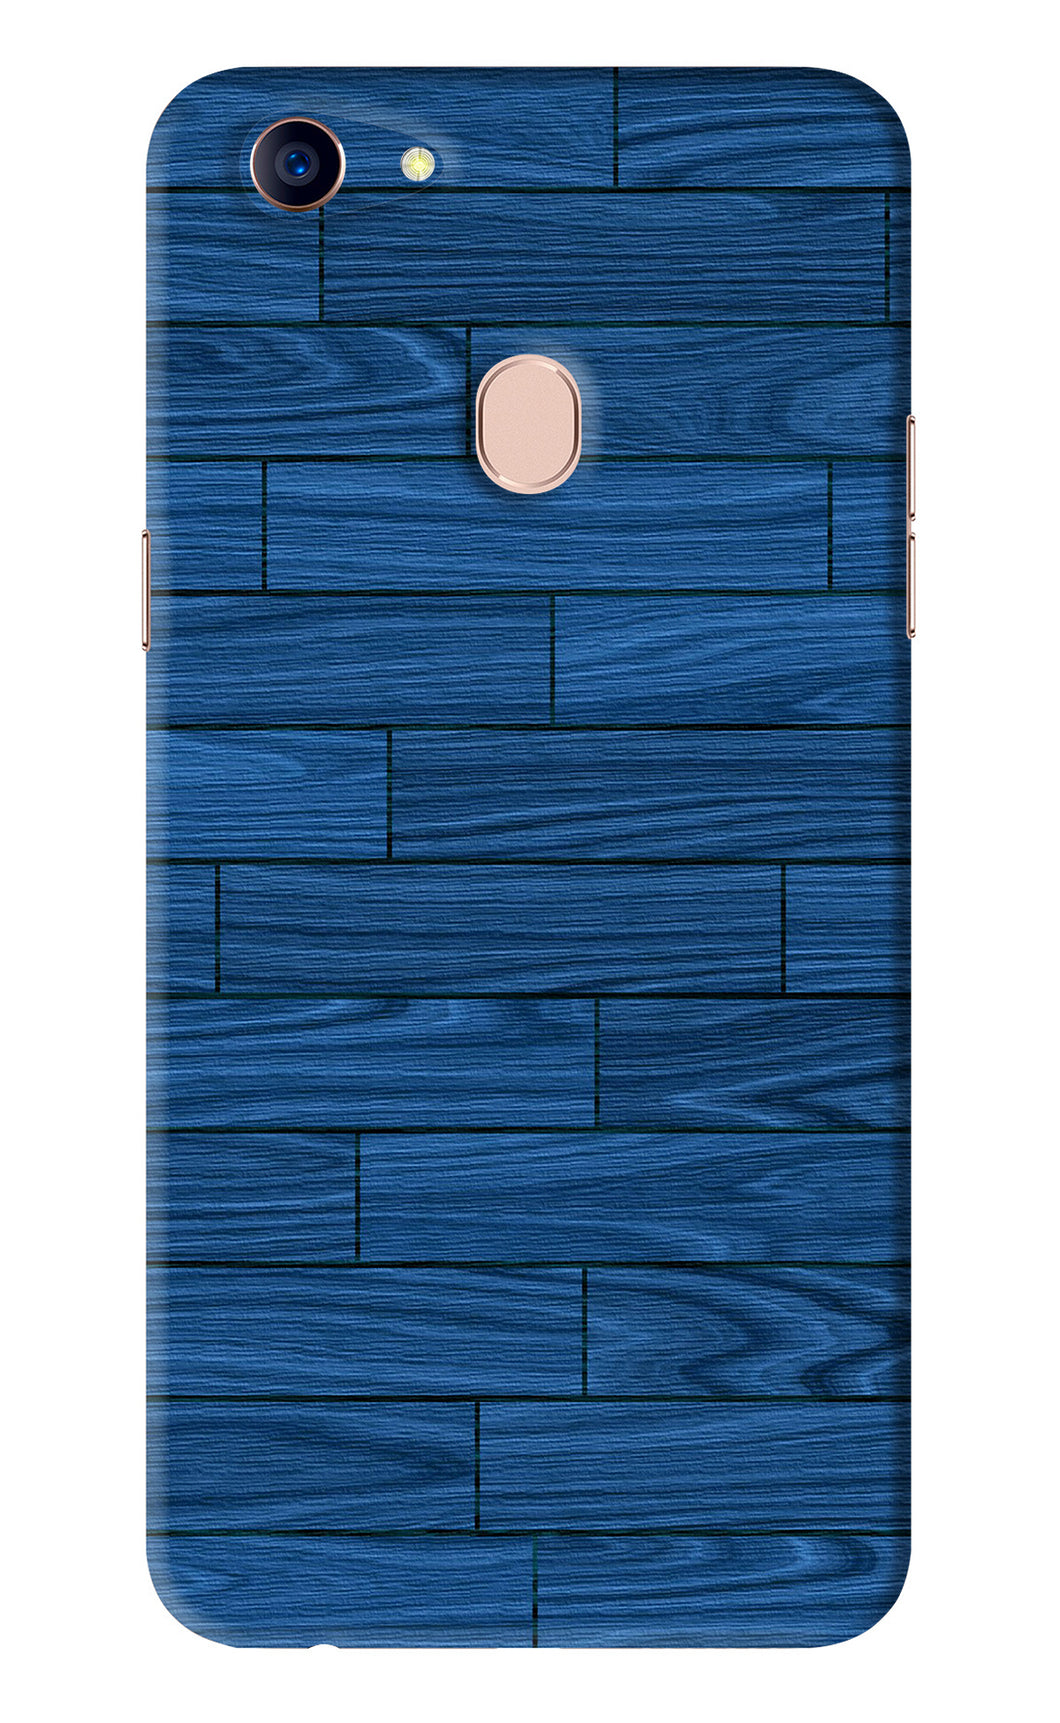 Blue Wooden Texture Oppo F5 Back Skin Wrap